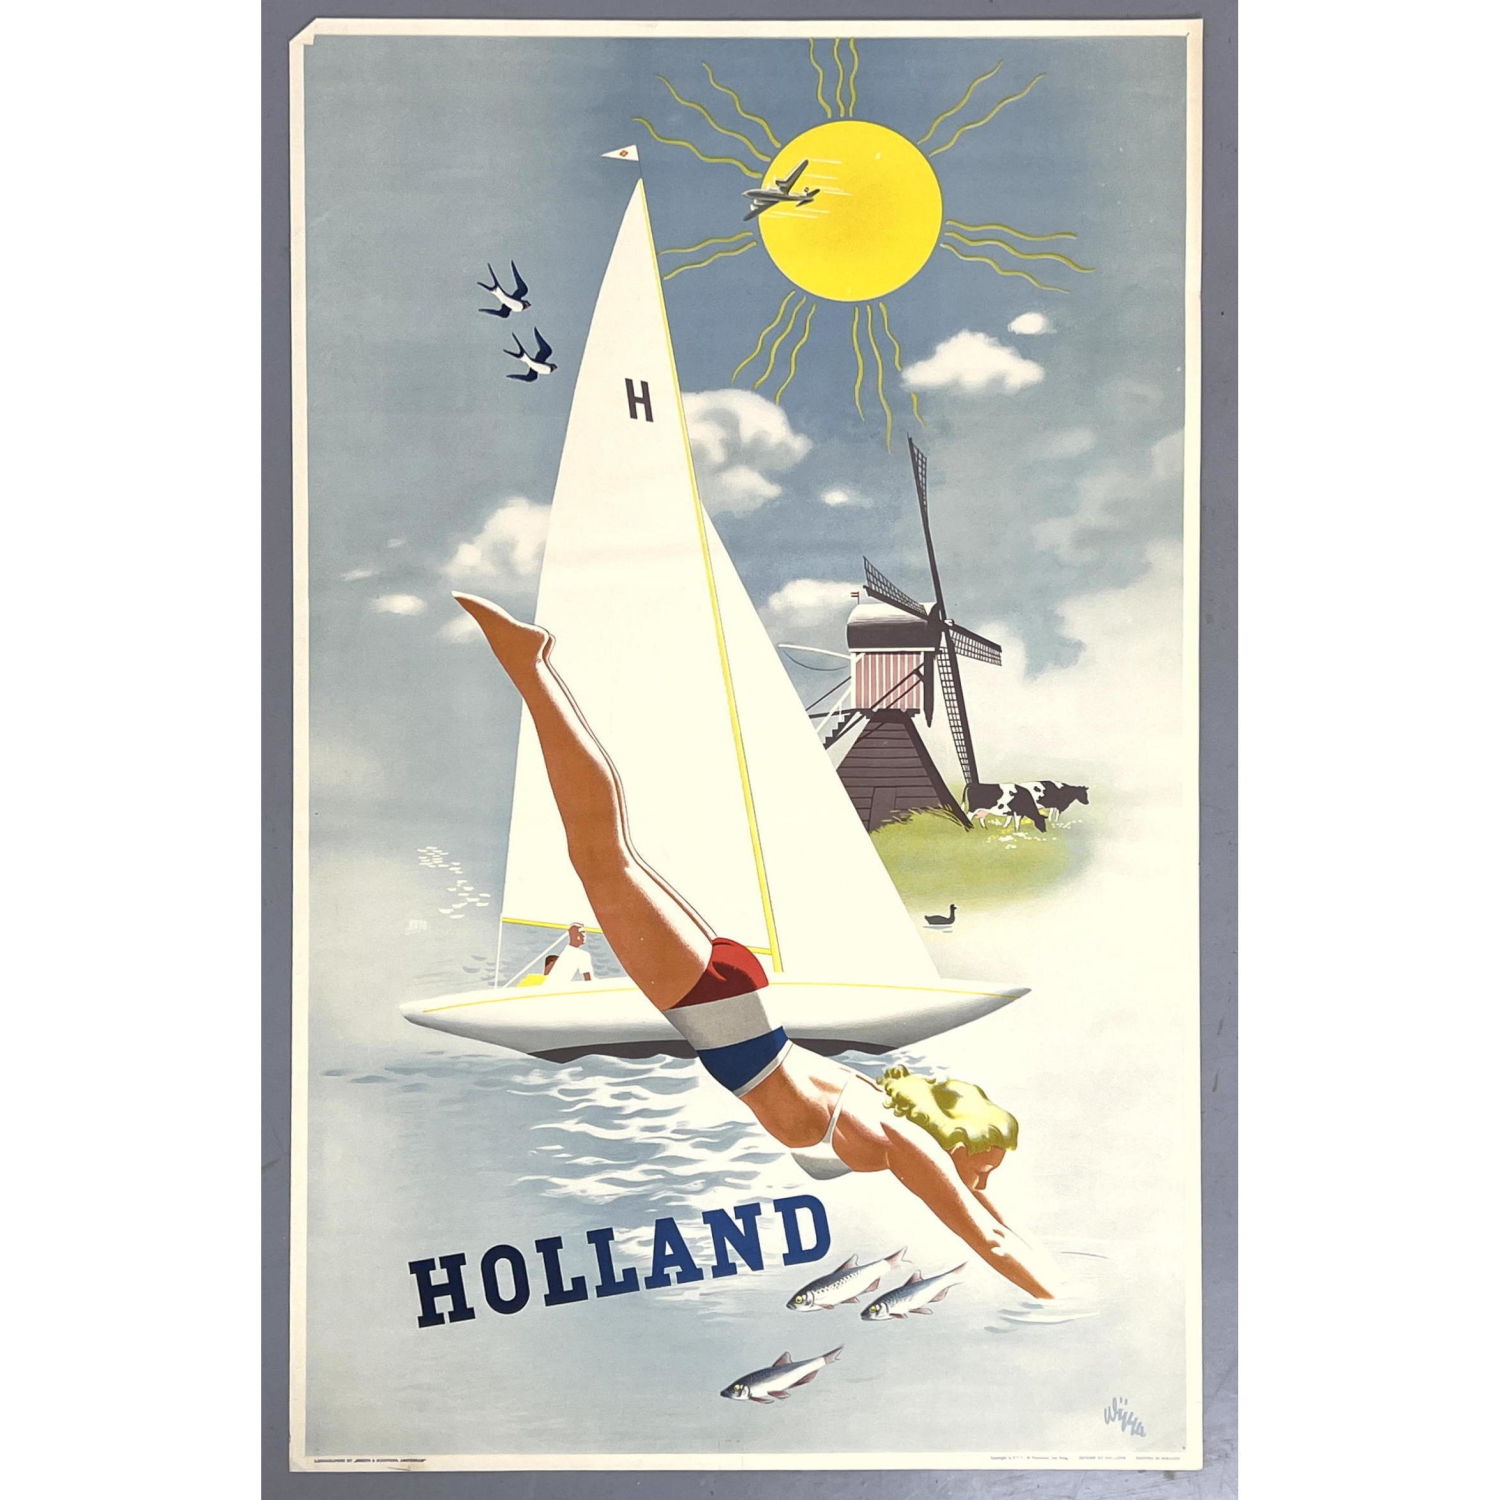 HOLLAND Travel Advertising Poster.